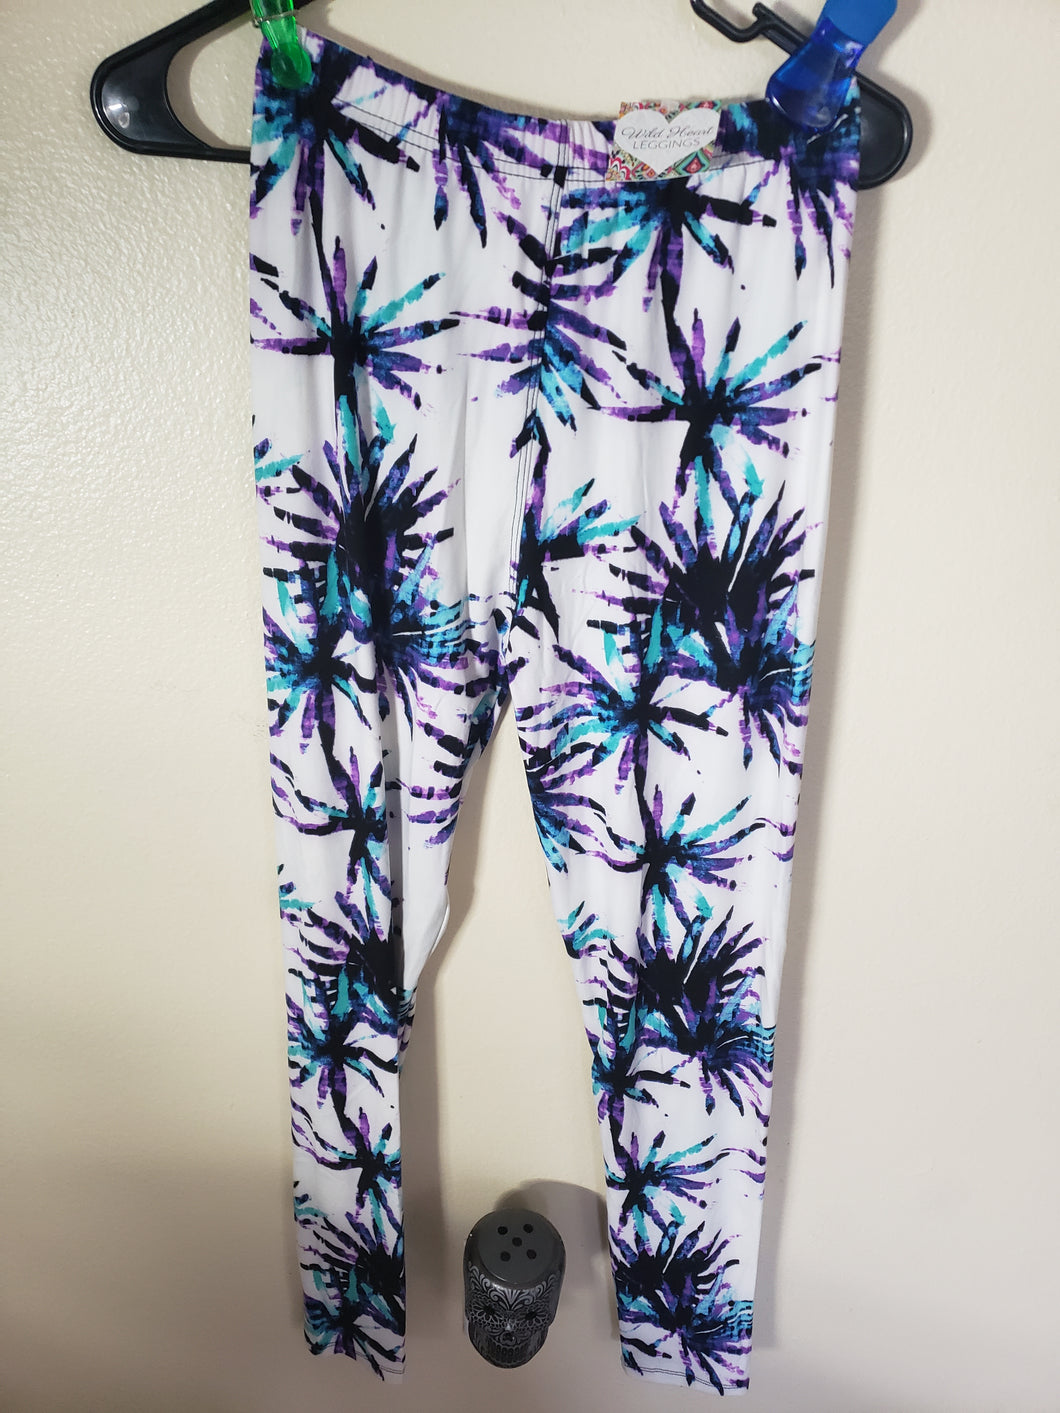 Colorful Starburst Luxuriously Soft Leggings for Women (Size-One Size)